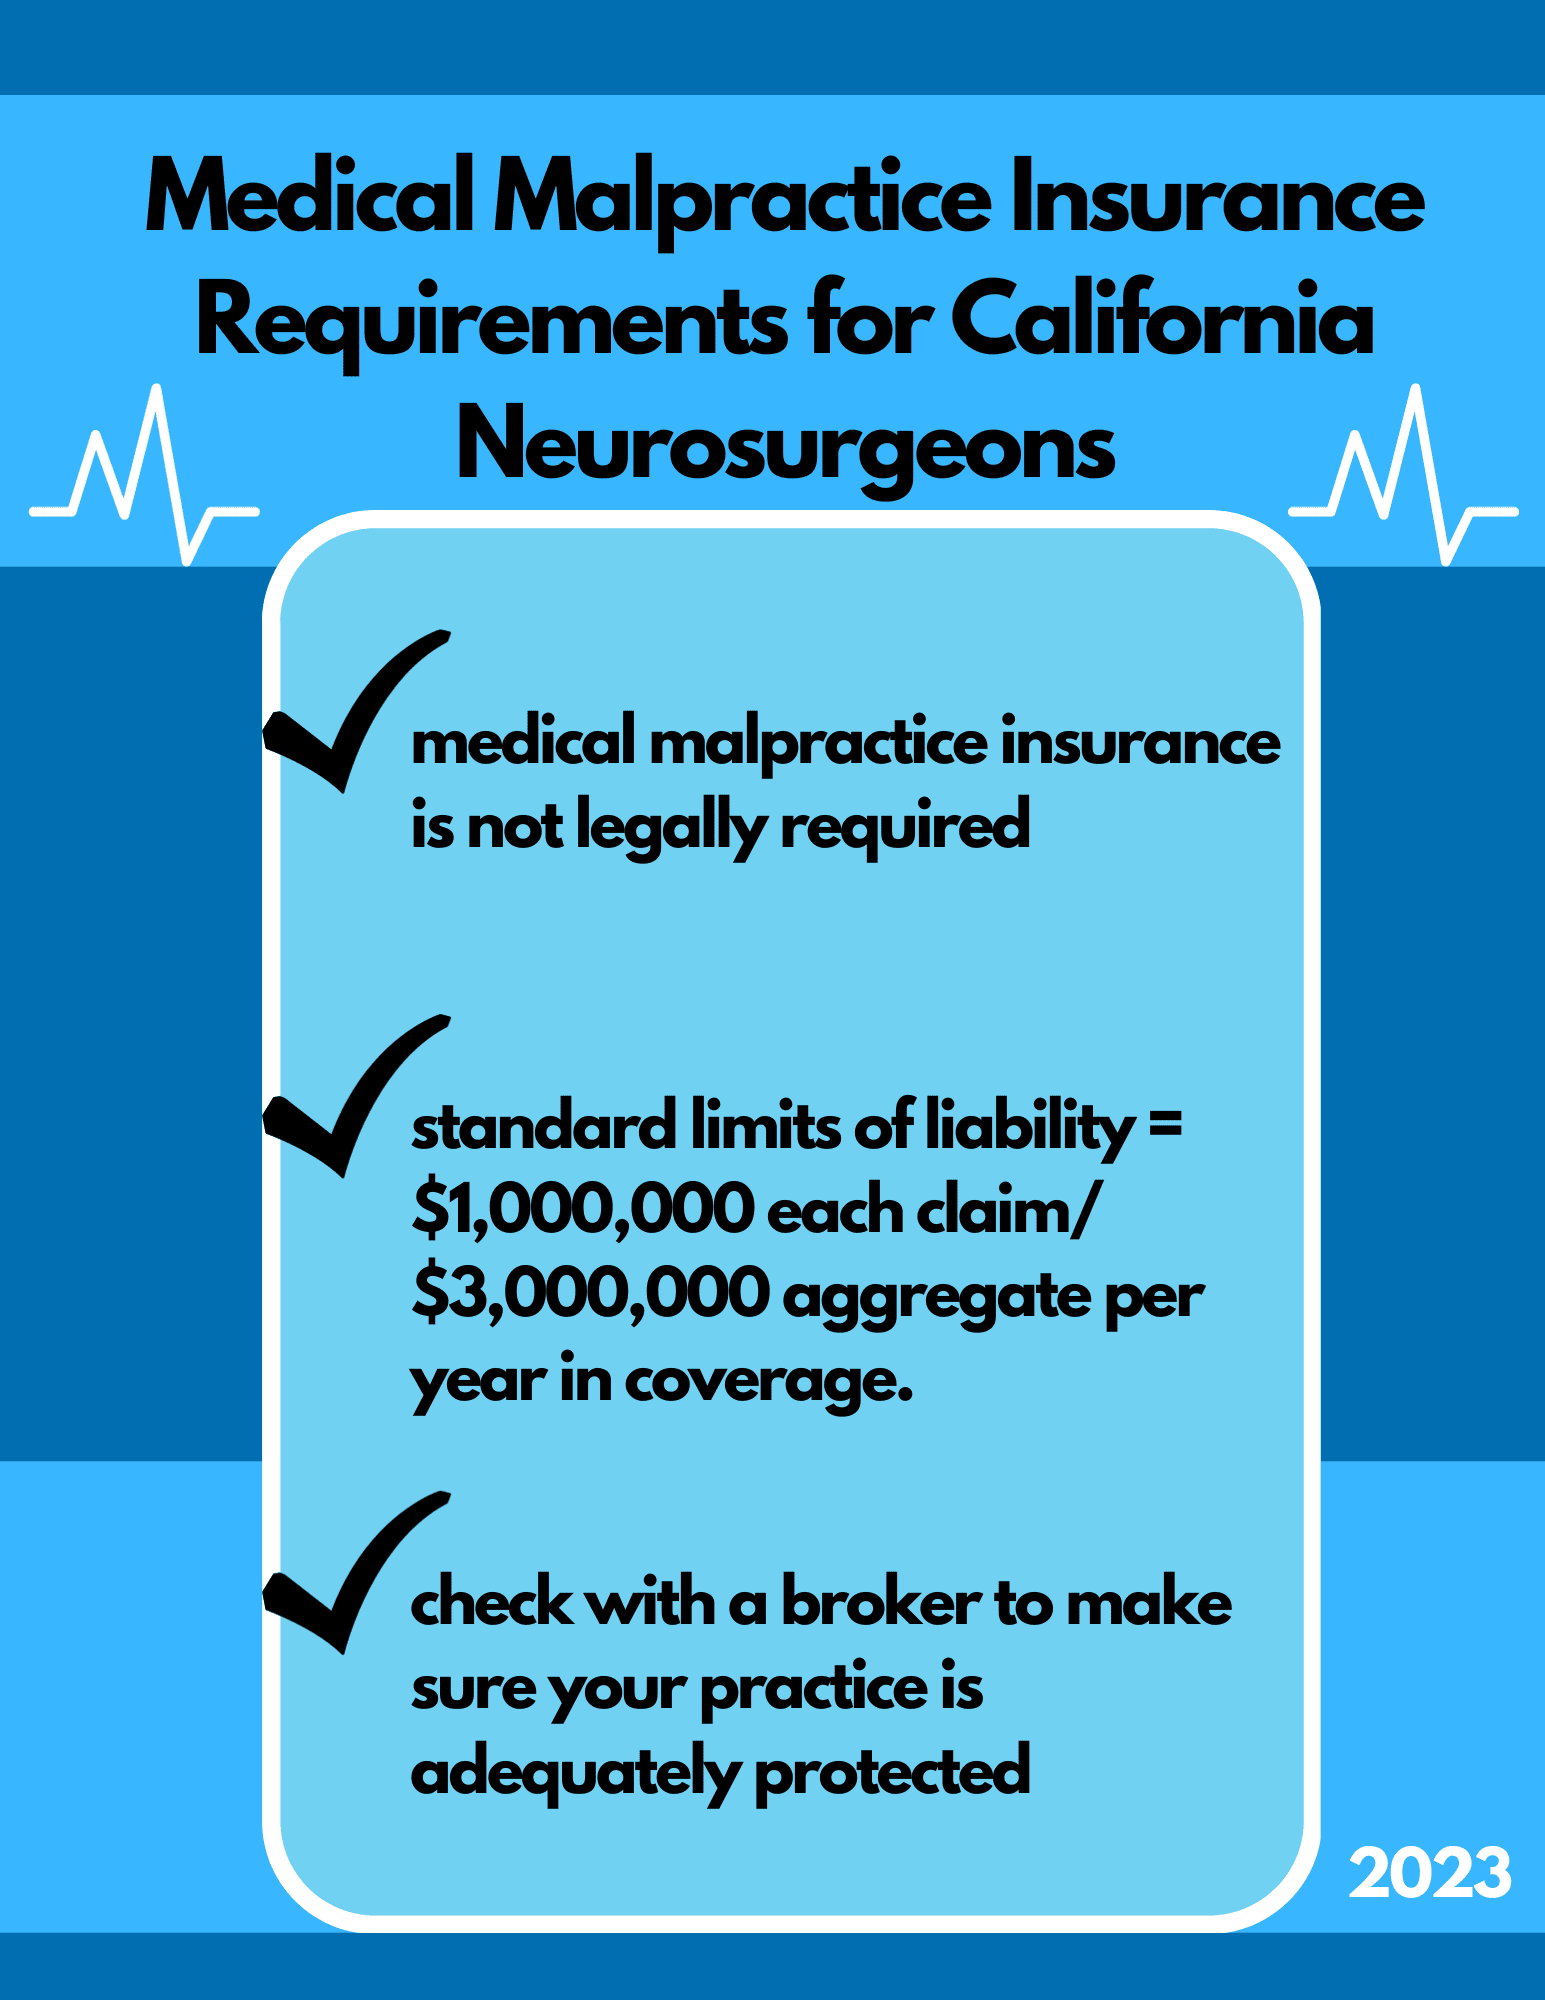 Medical malpractice insurance requirements for neurosurgeons in California